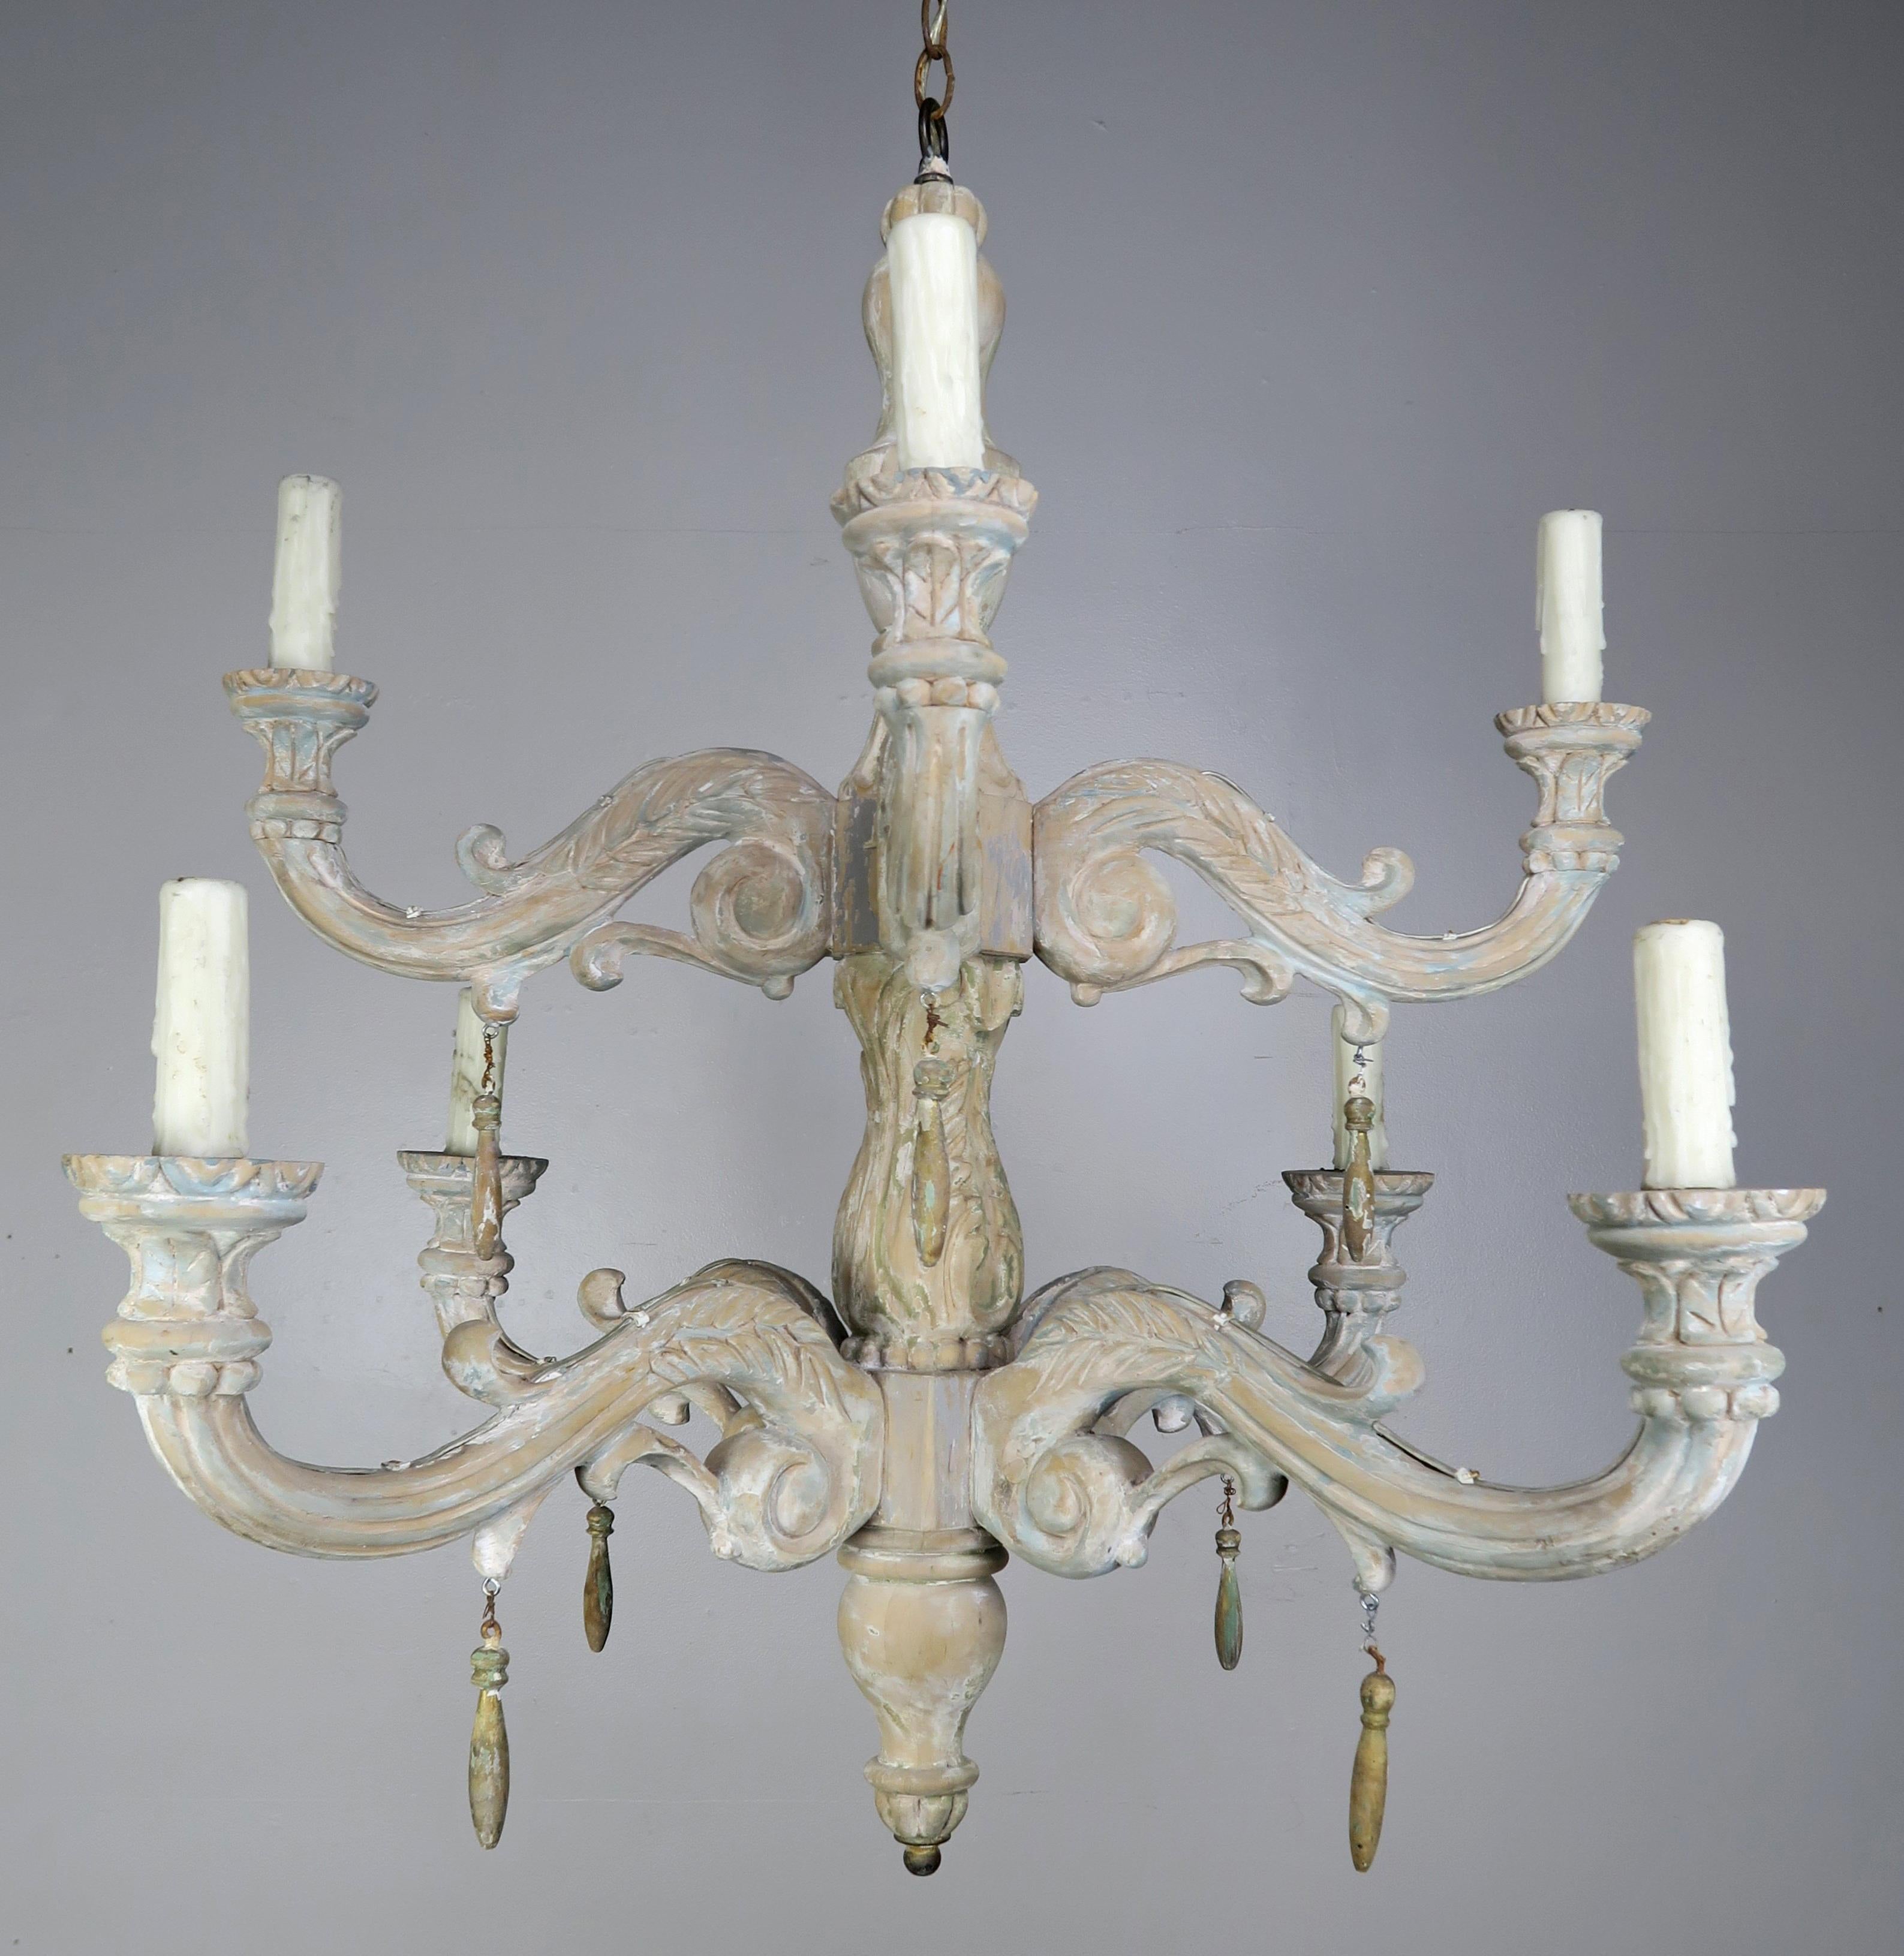 Eight-Light Carved Wood Chandelier with Tassels, 20th Century 8